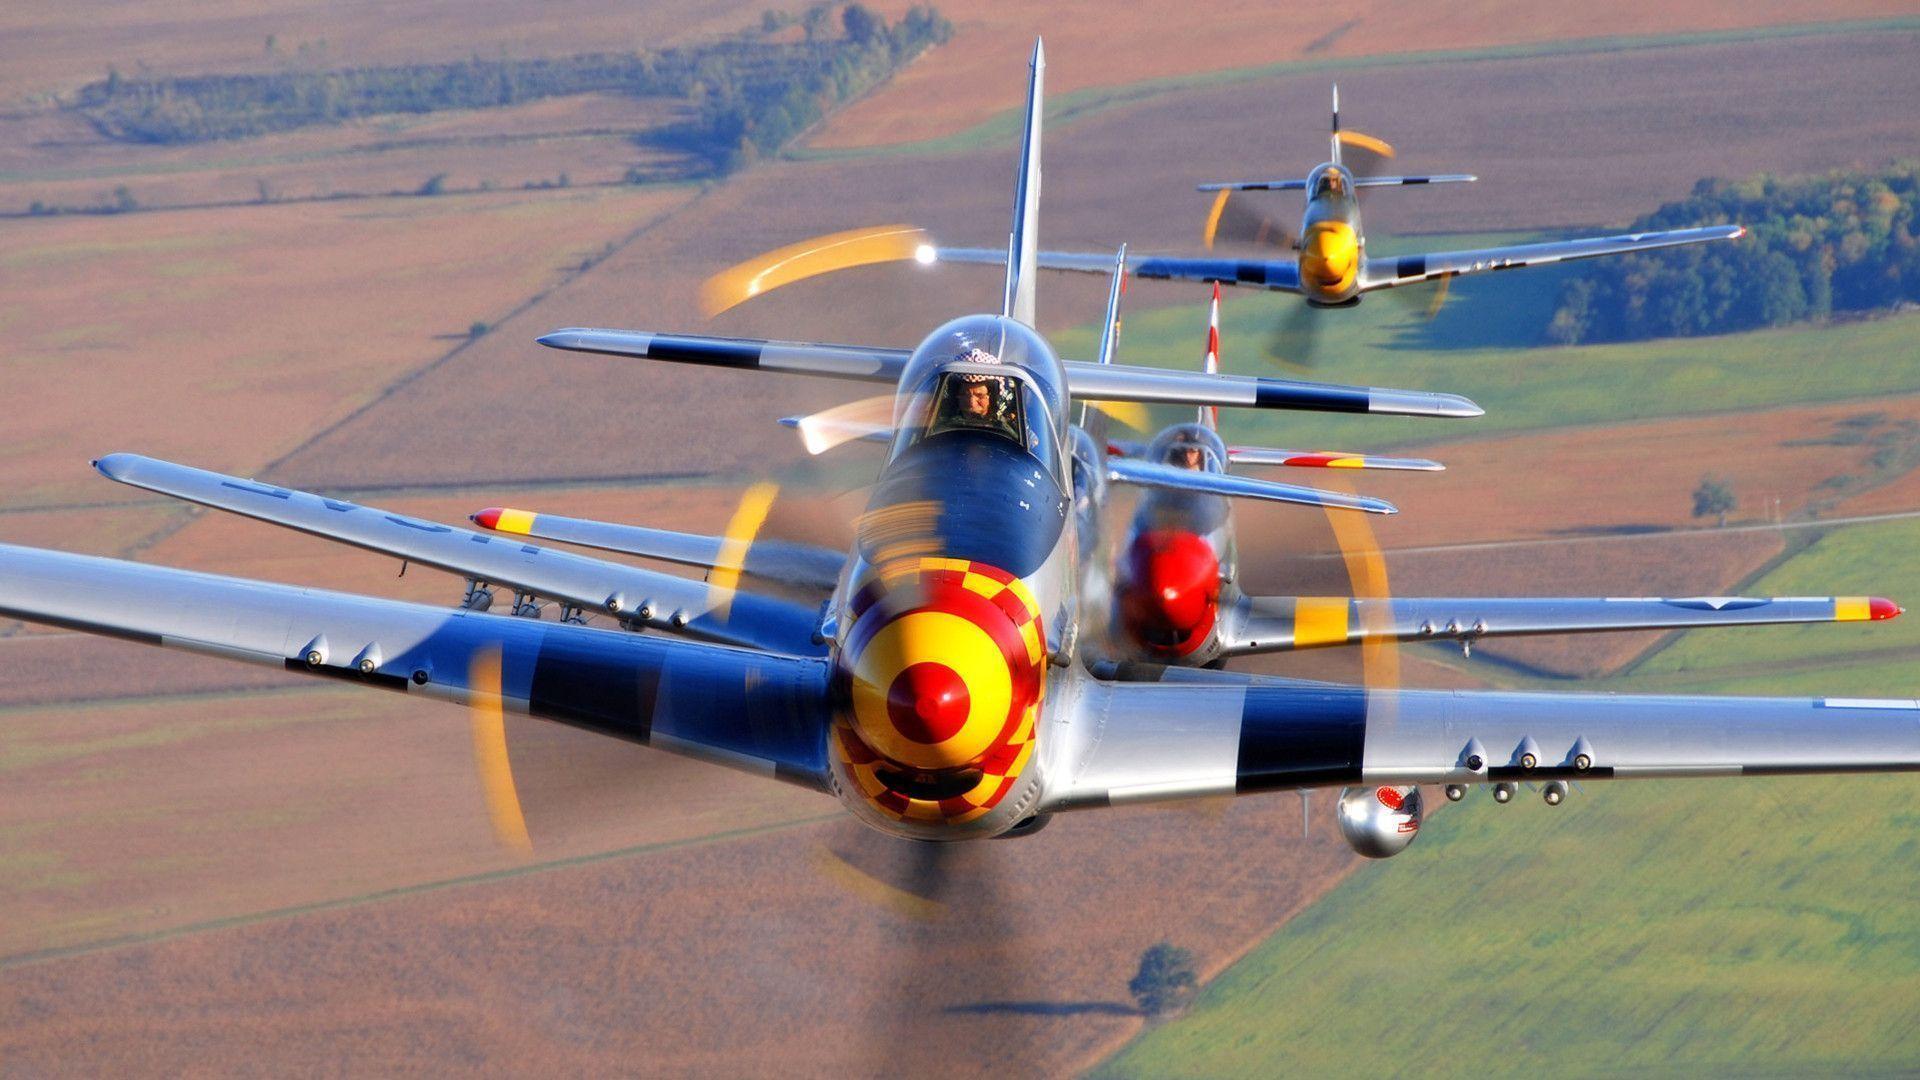 P 51 Mustangs, A Group Flight. HQ Wallpaper For PC